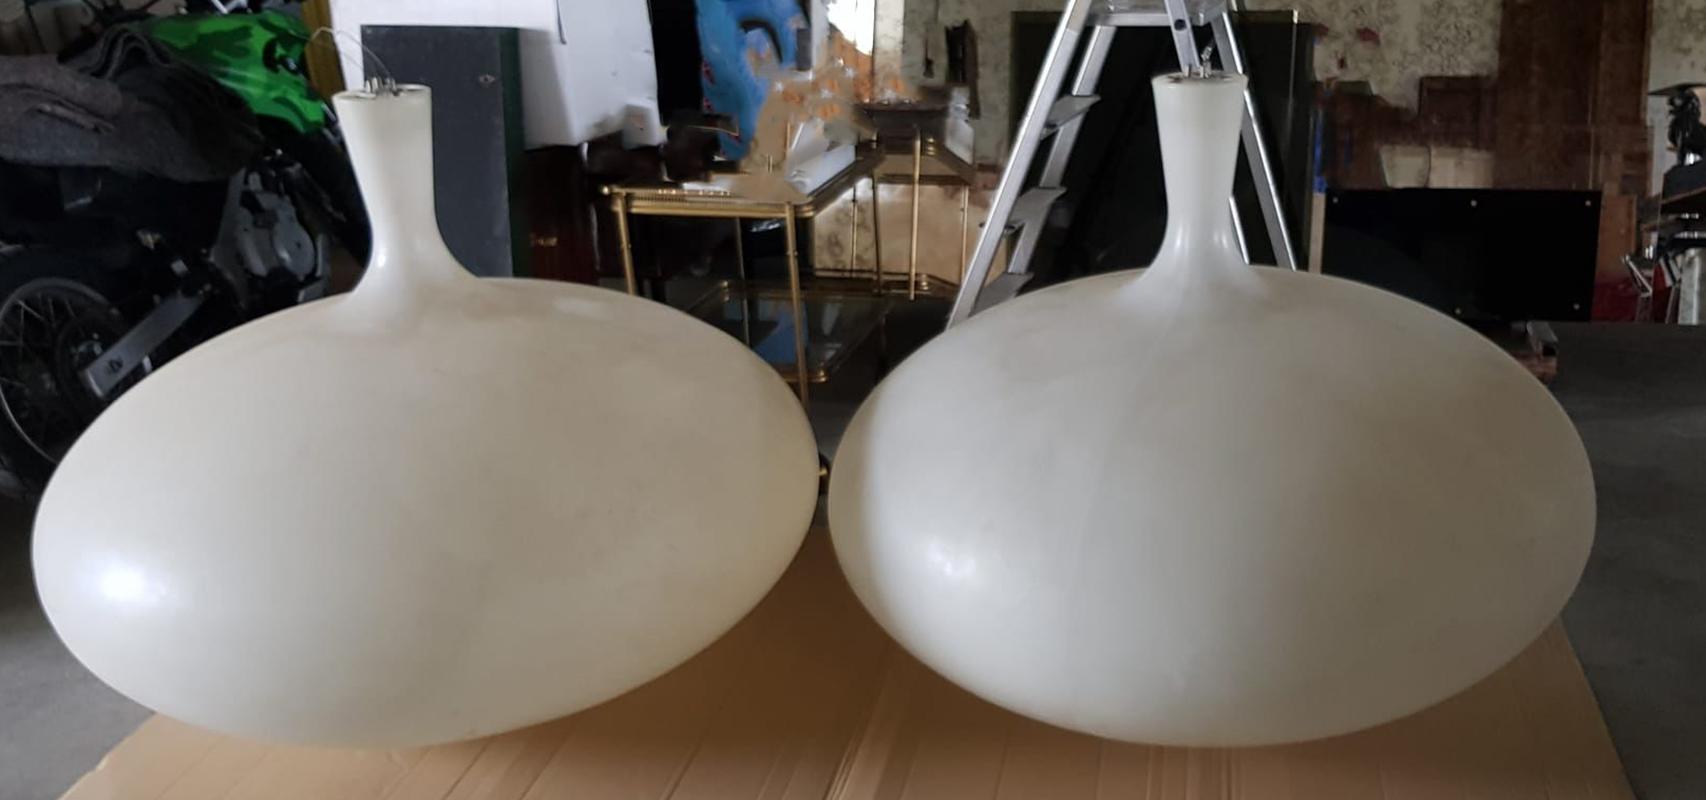 Chandeliers from a 1970s disco club.
They are made out of white resin and they measure diameter 130 cm height cm. We have two available now.
They features neon lights.
We have cleaned and no restoration was needed.

Shipping all over the world.
Zip